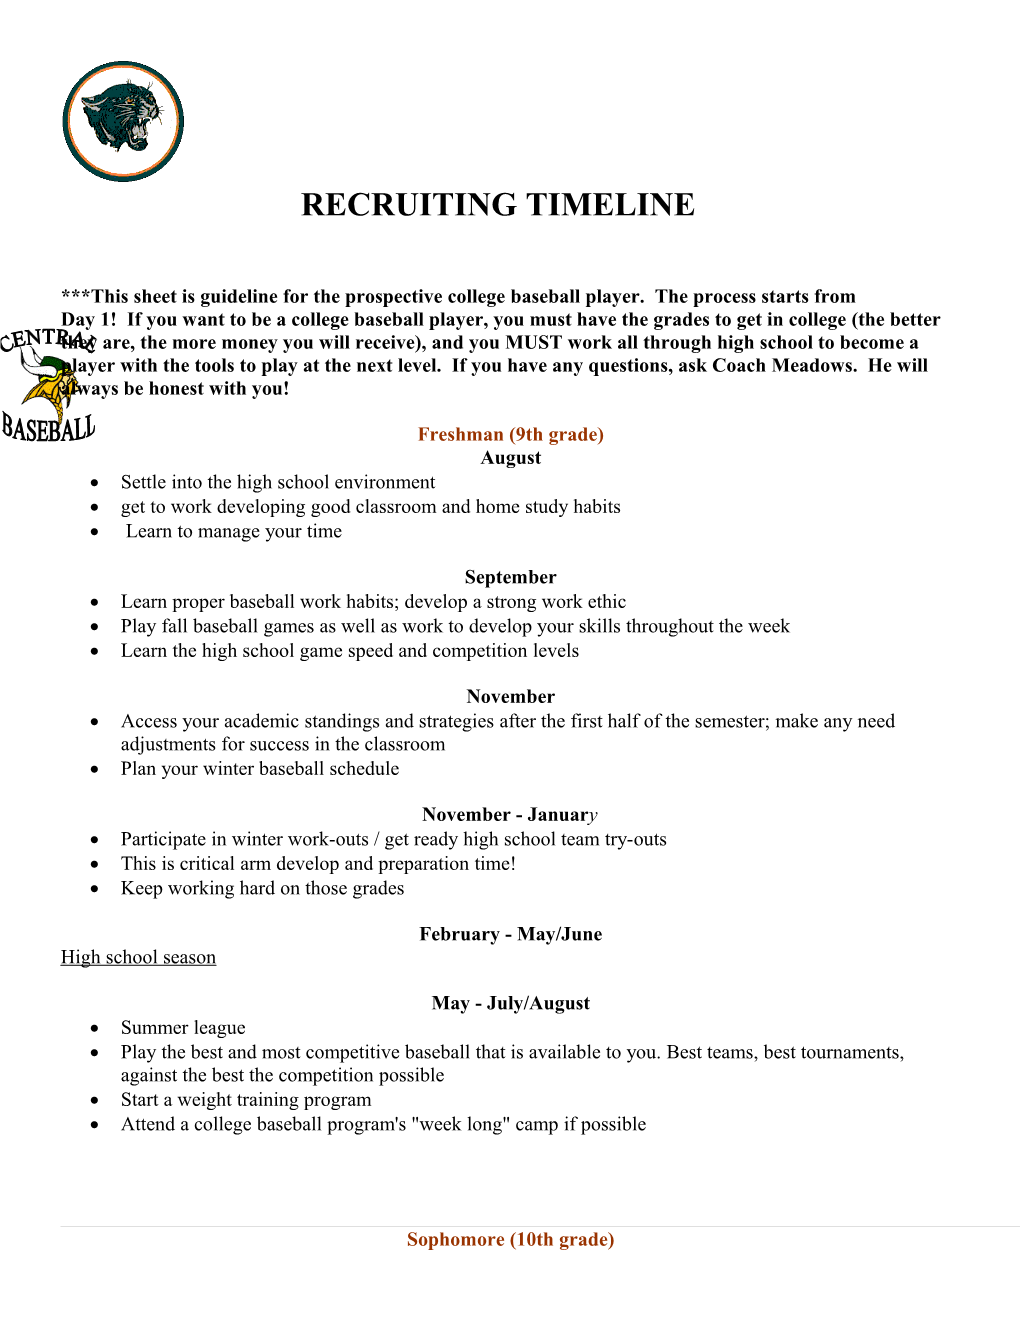 This Sheet Is Guideline for the Prospective College Baseball Player. the Process Starts From